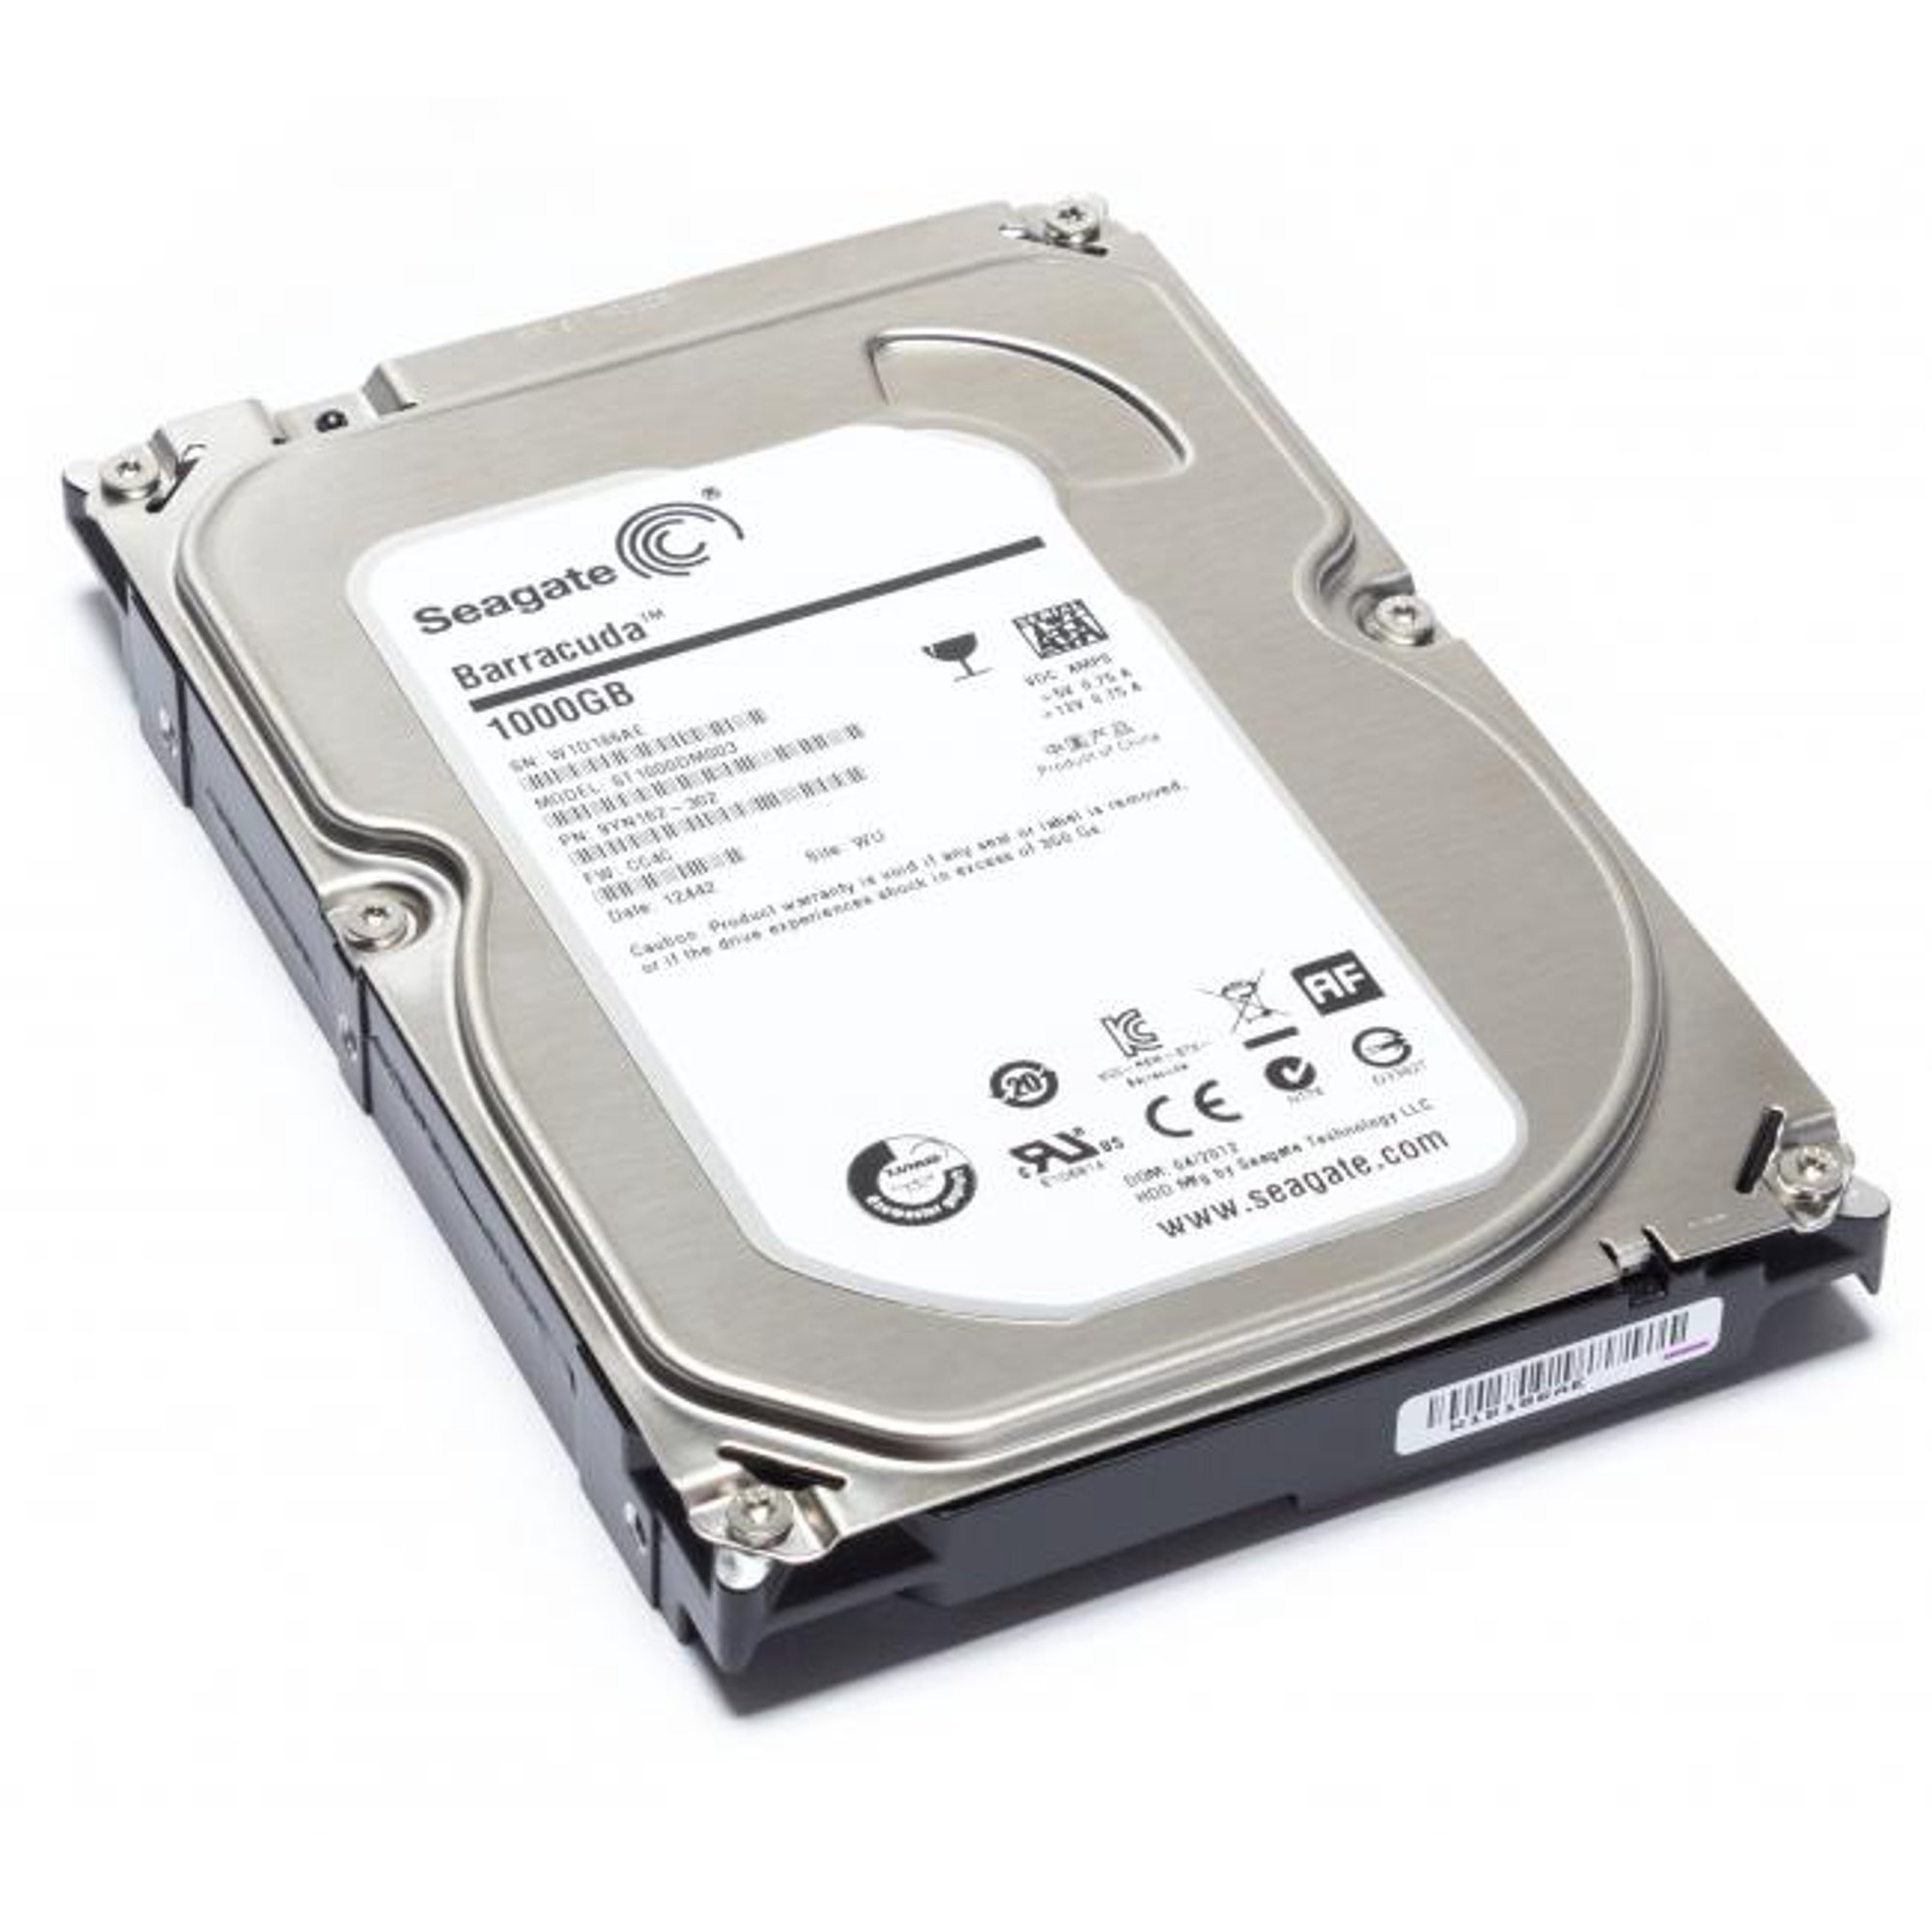 Data Recovery Services 